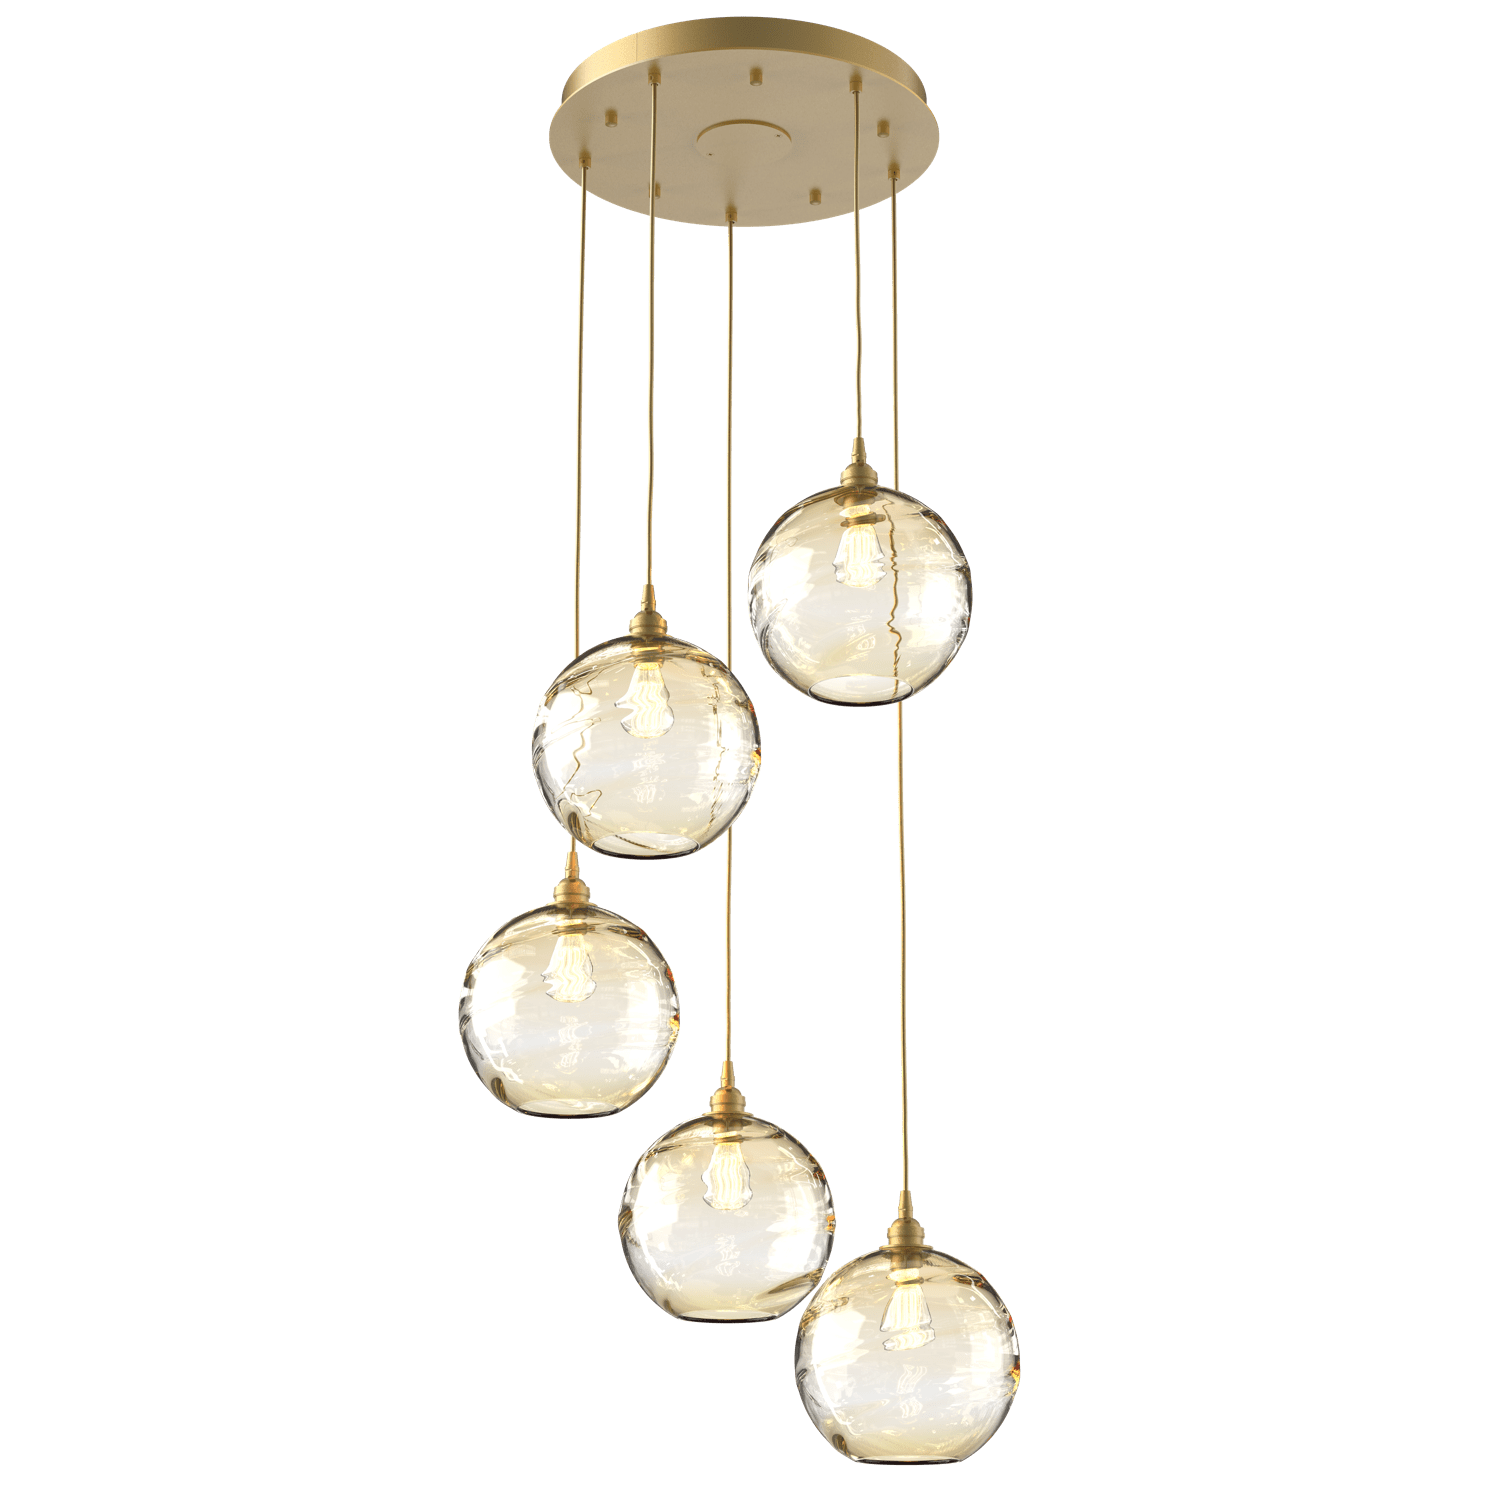 CHB0047-05-GB-OA-Hammerton-Studio-Optic-Blown-Glass-Terra-5-light-round-pendant-chandelier-with-gilded-brass-finish-and-optic-amber-blown-glass-shades-and-incandescent-lamping